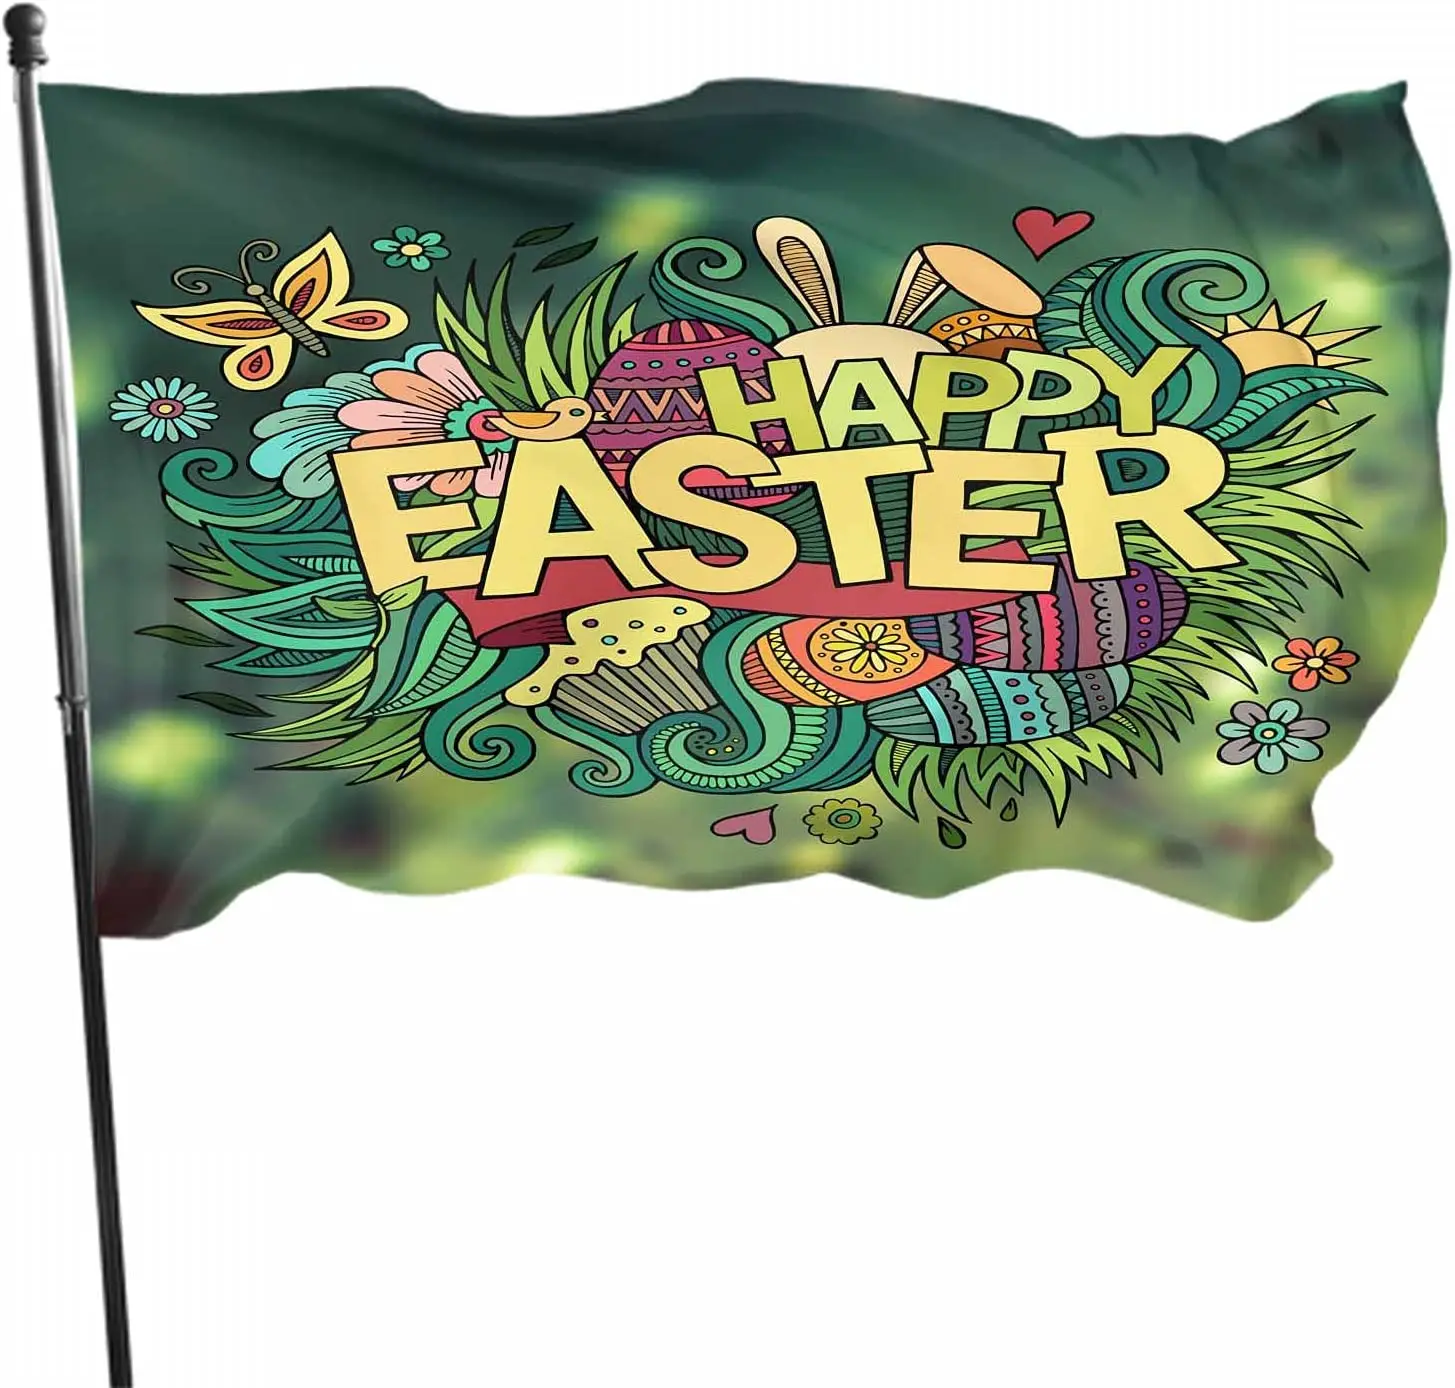 Happy Easter Calligraphy Flag Decor 3x5 Ft Ethnic Tribal Nature Rabbit Grass Forest Botanical Polyester Pattern Outdoor Decor